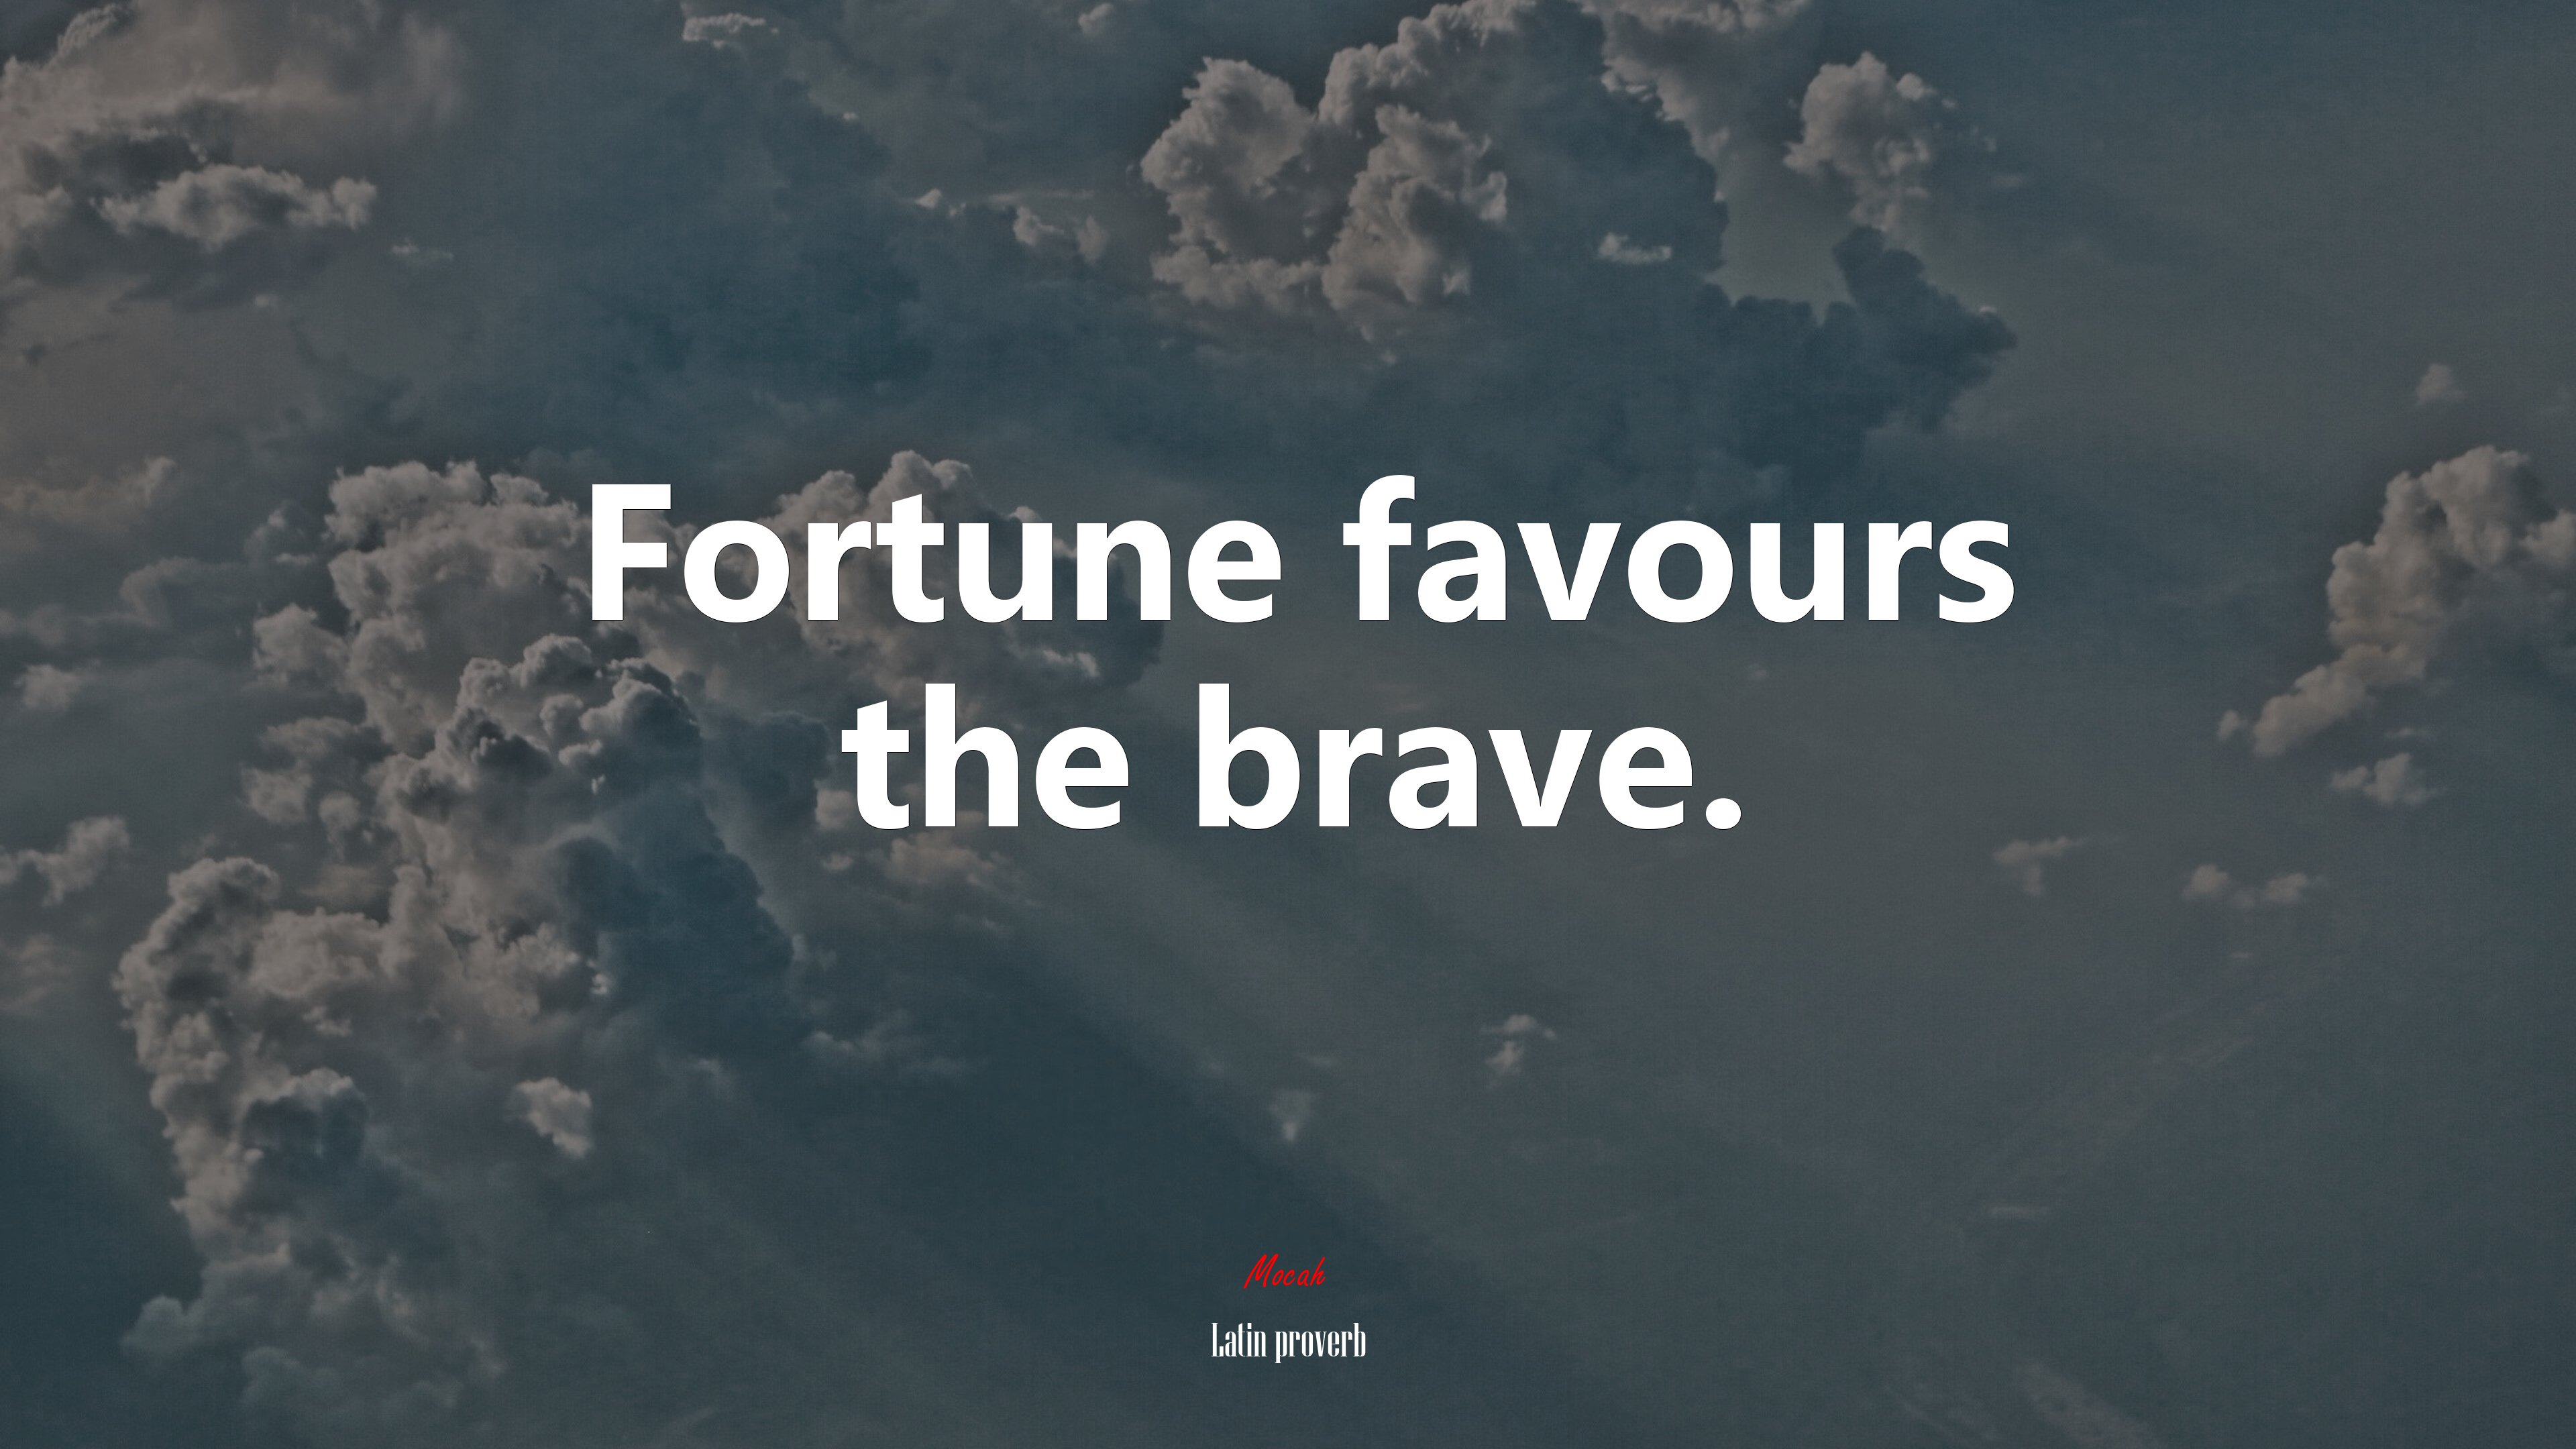 Fortune favours the brave. Latin proverb quote Gallery HD Wallpaper